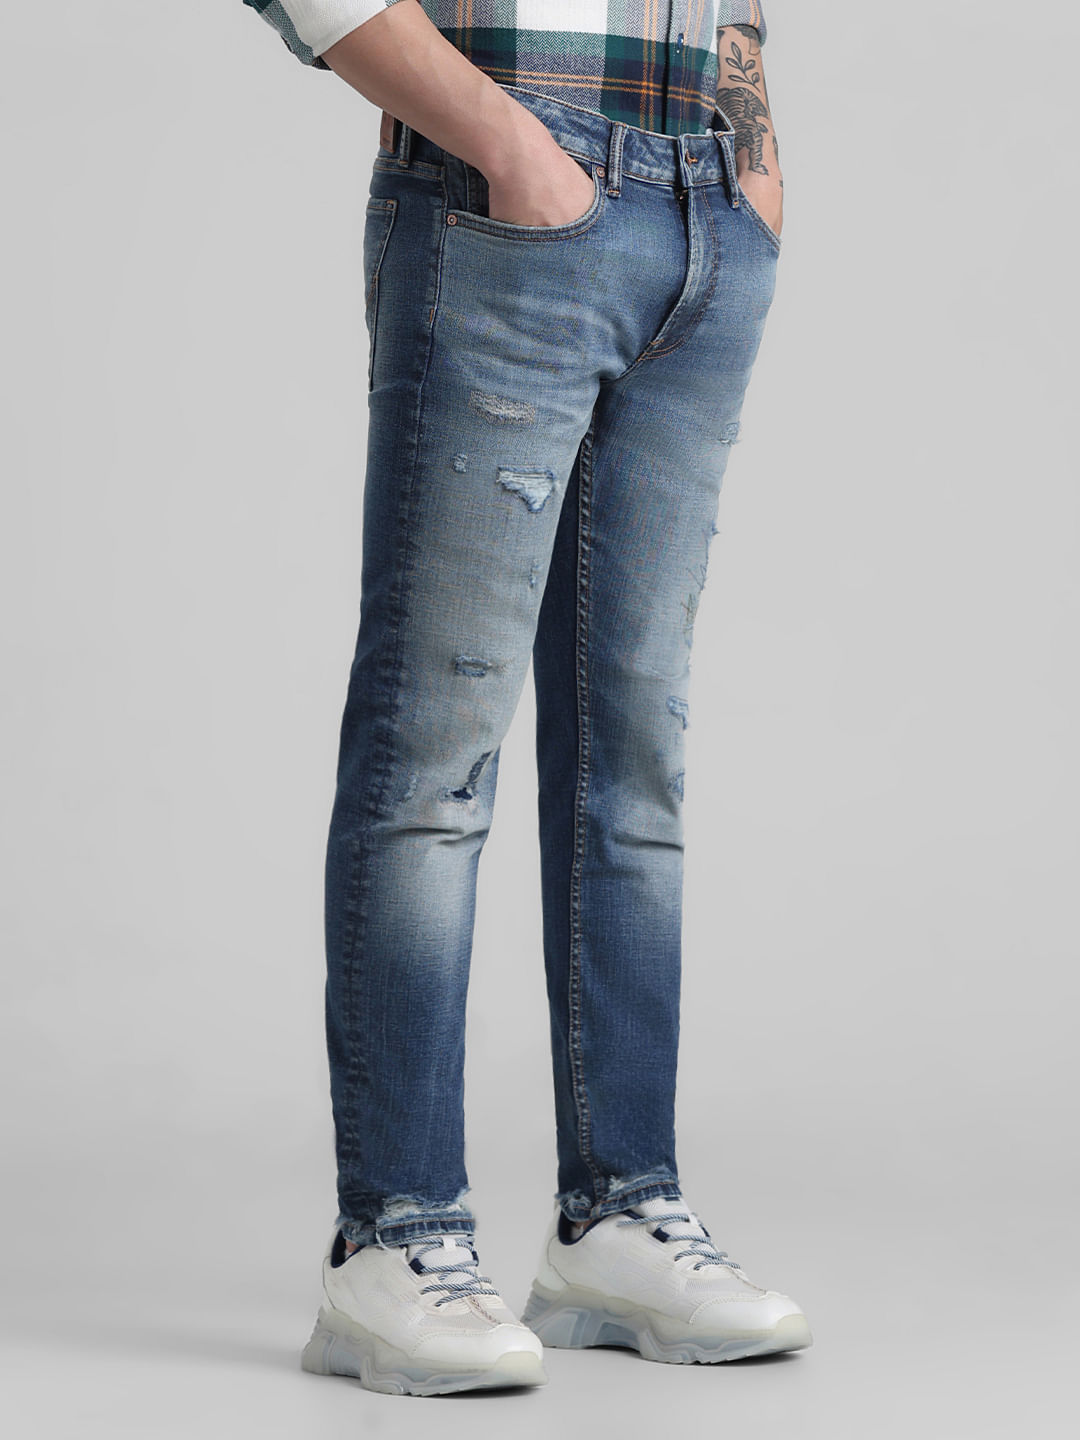 Seine Mid Rise Skinny Jeans 32 Inch - Distressed Blue | Universal Standard